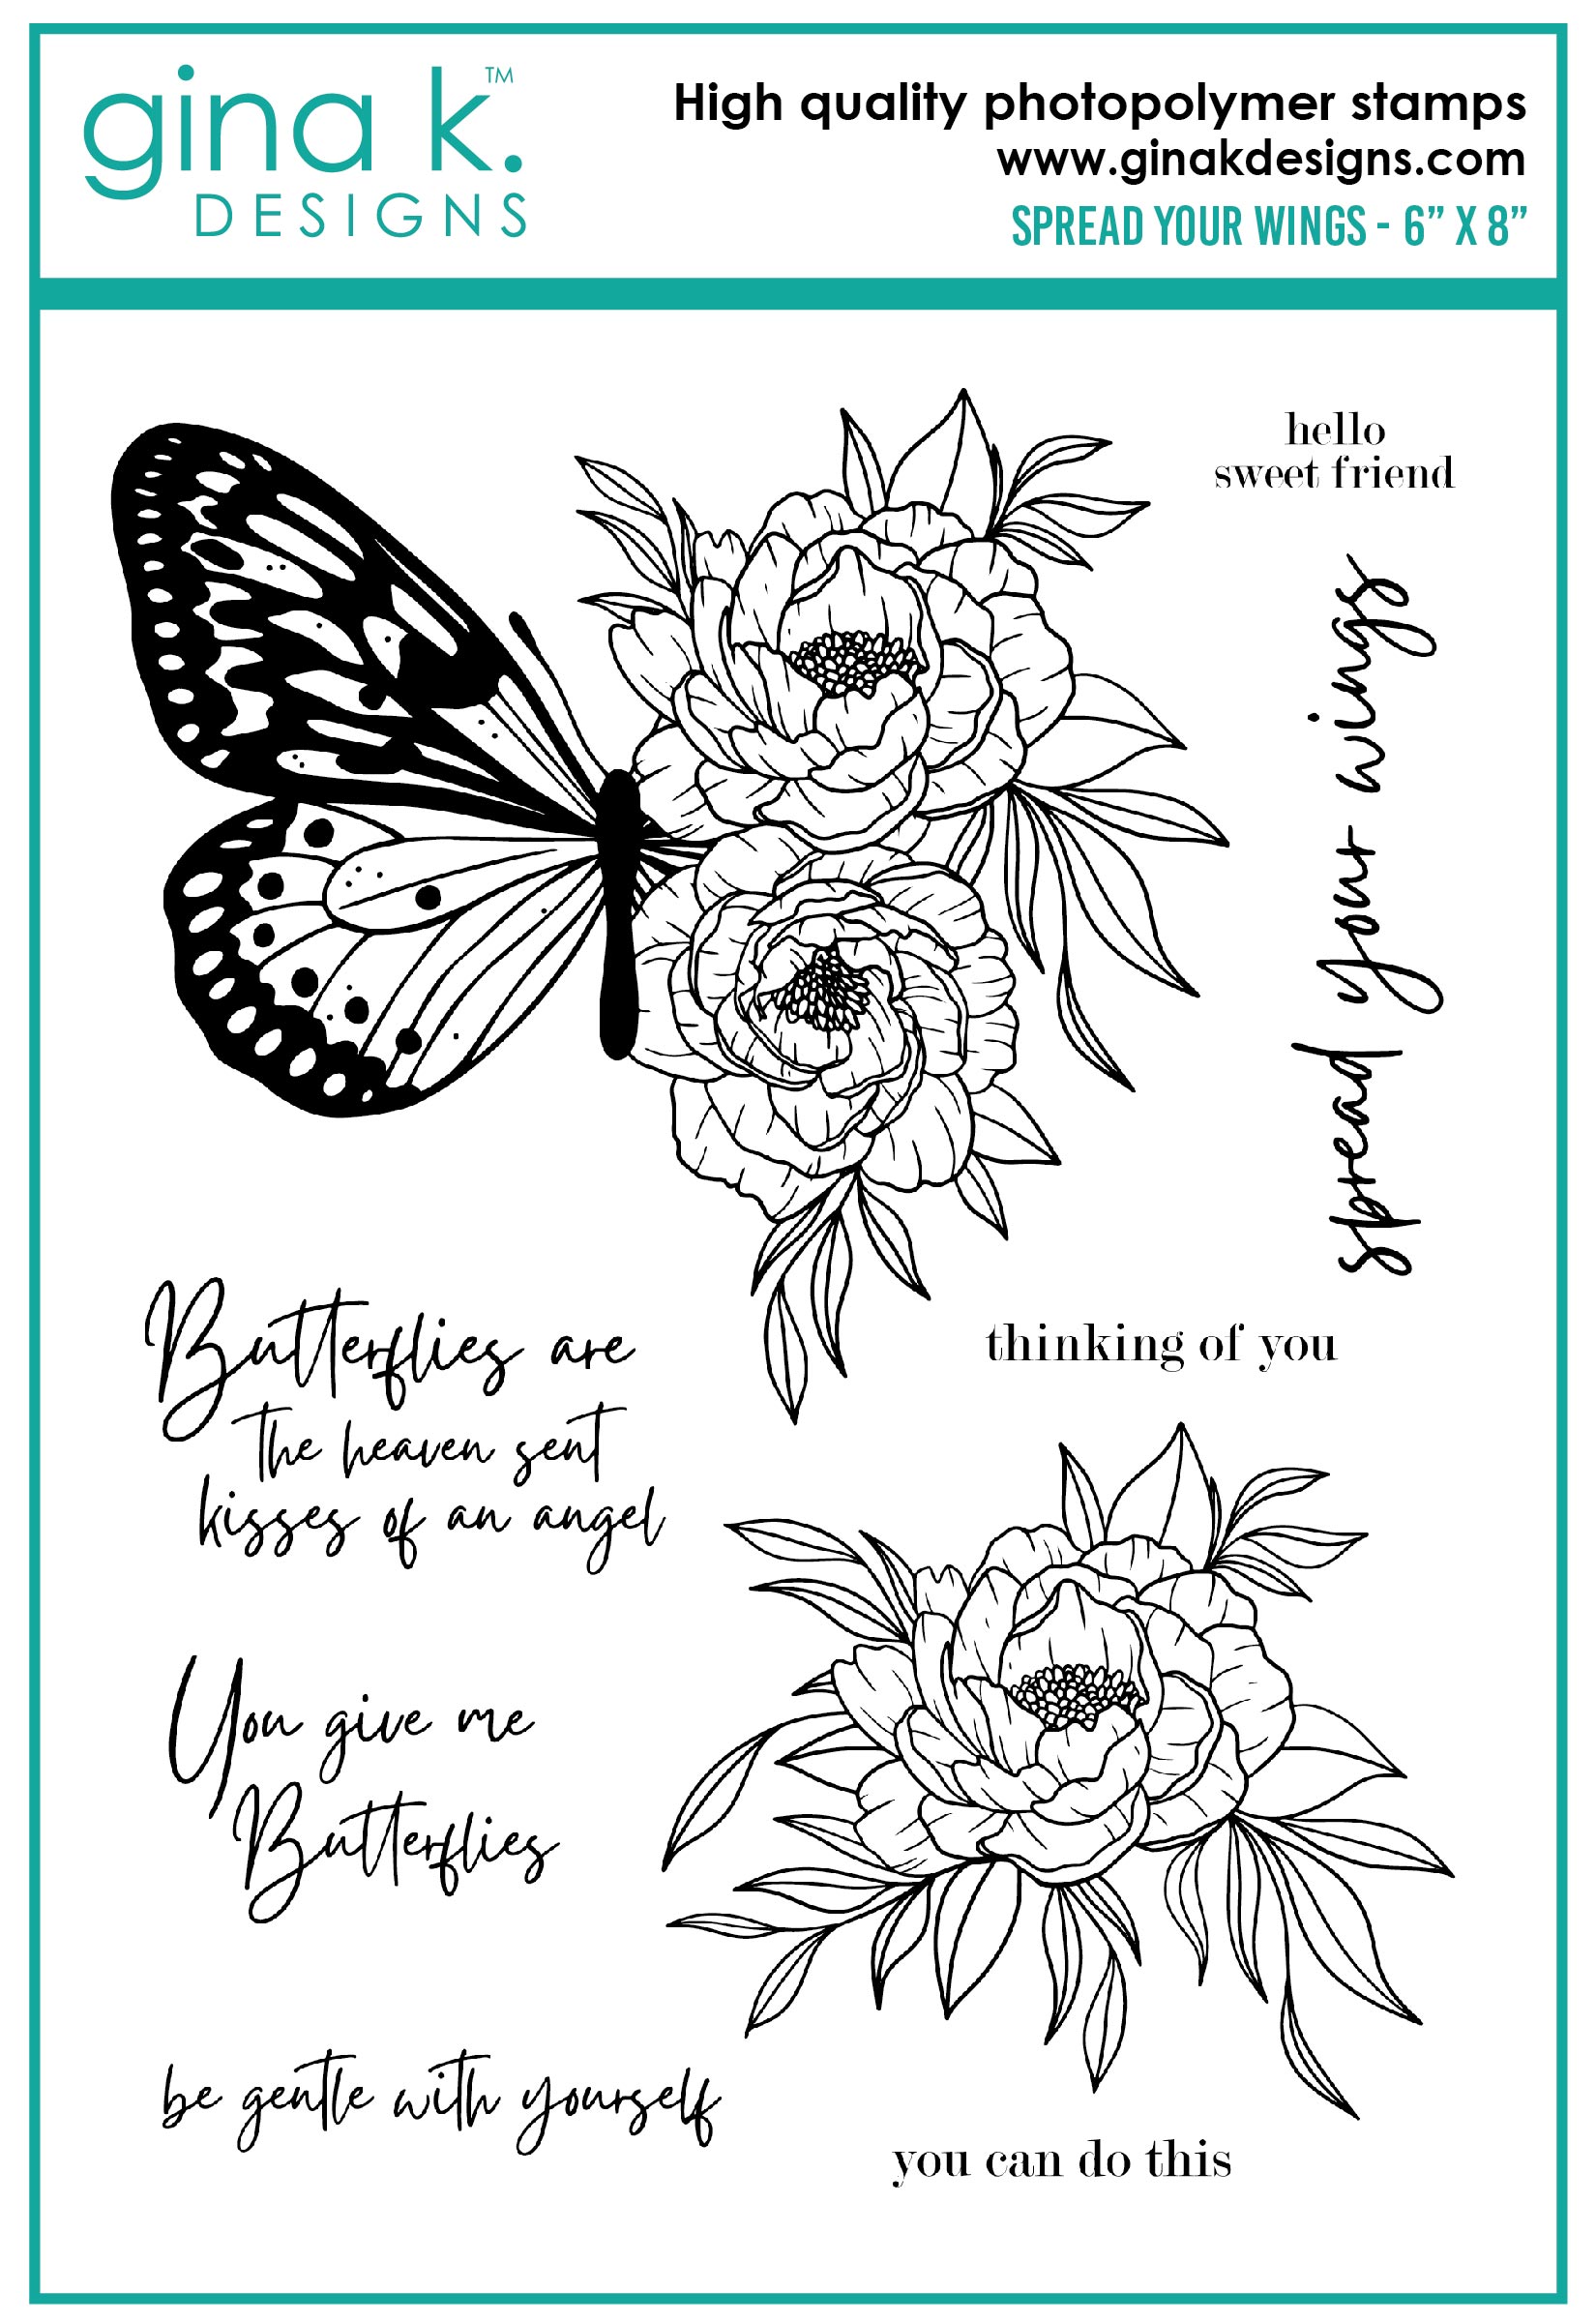 spread-your-wings-stamp-for-web-01